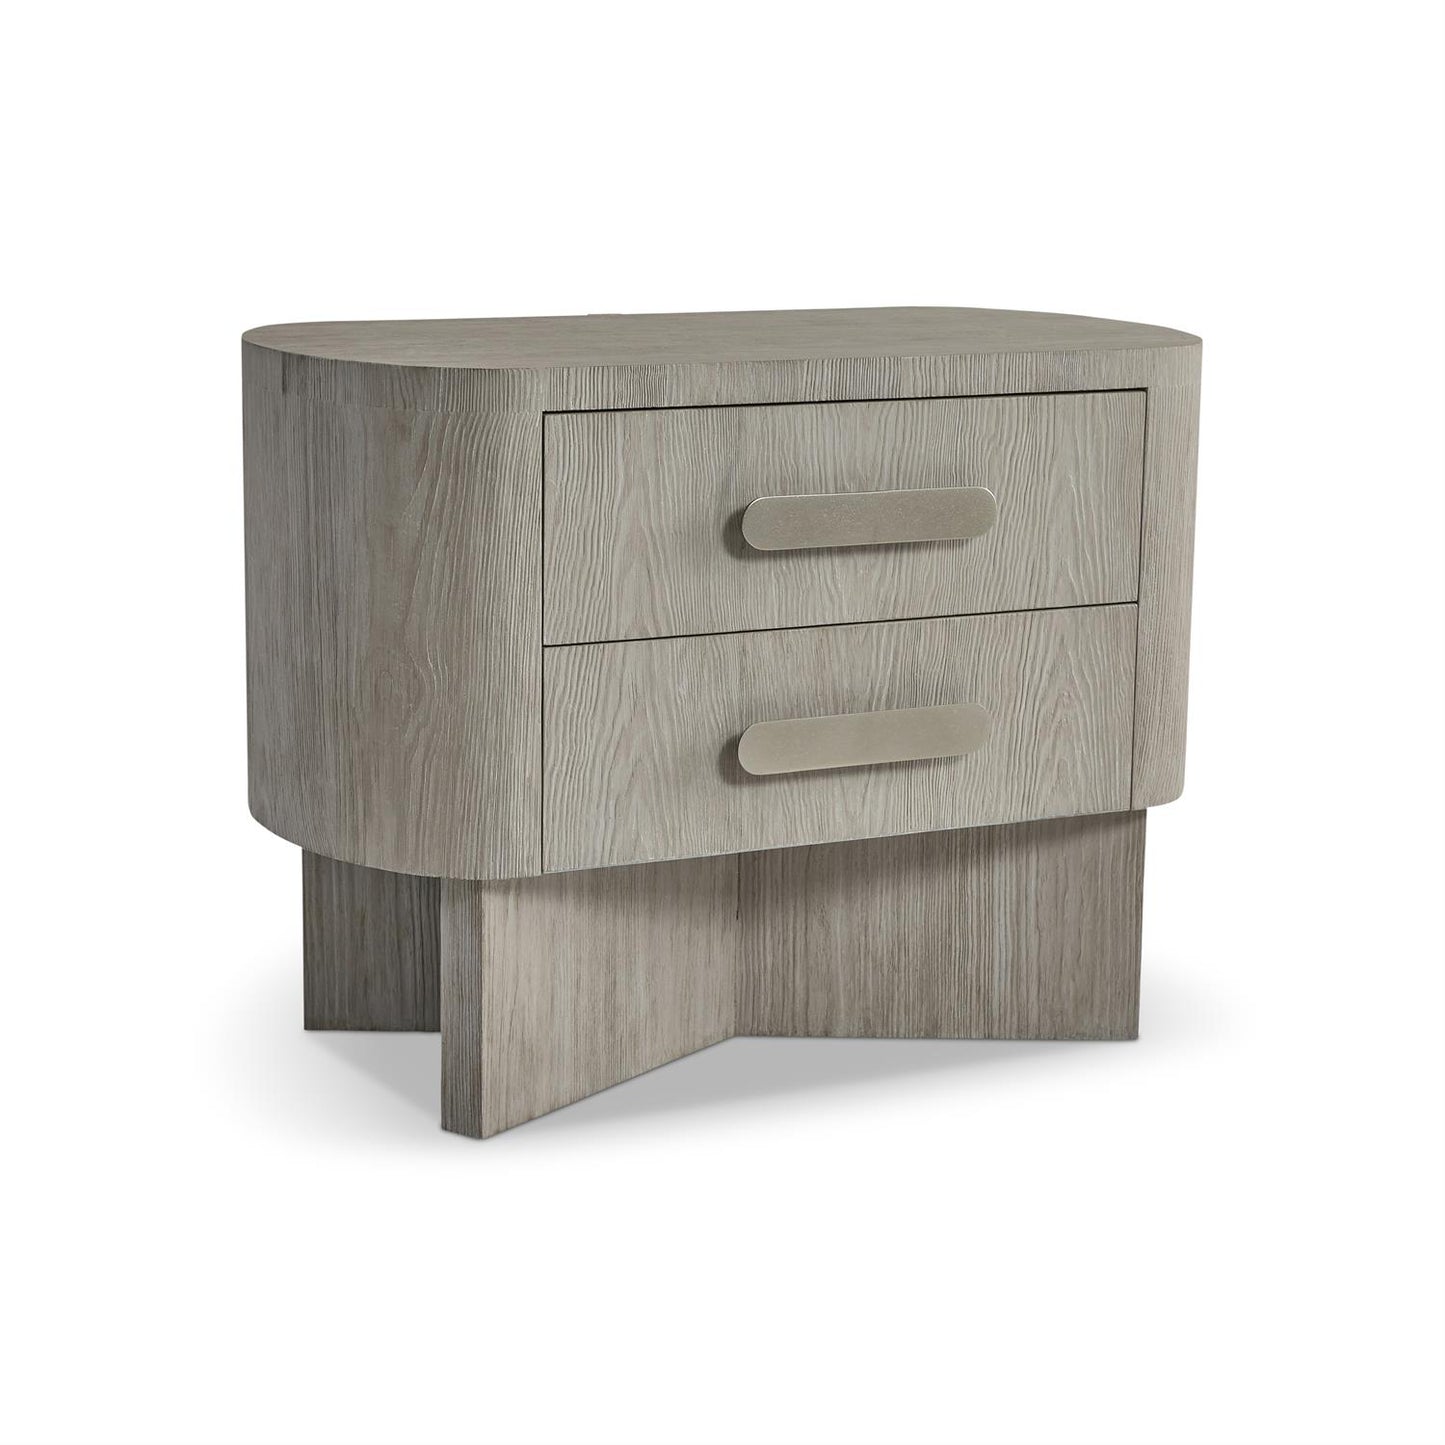 Rianon, Light, Two Drawers, Wide Nightstand